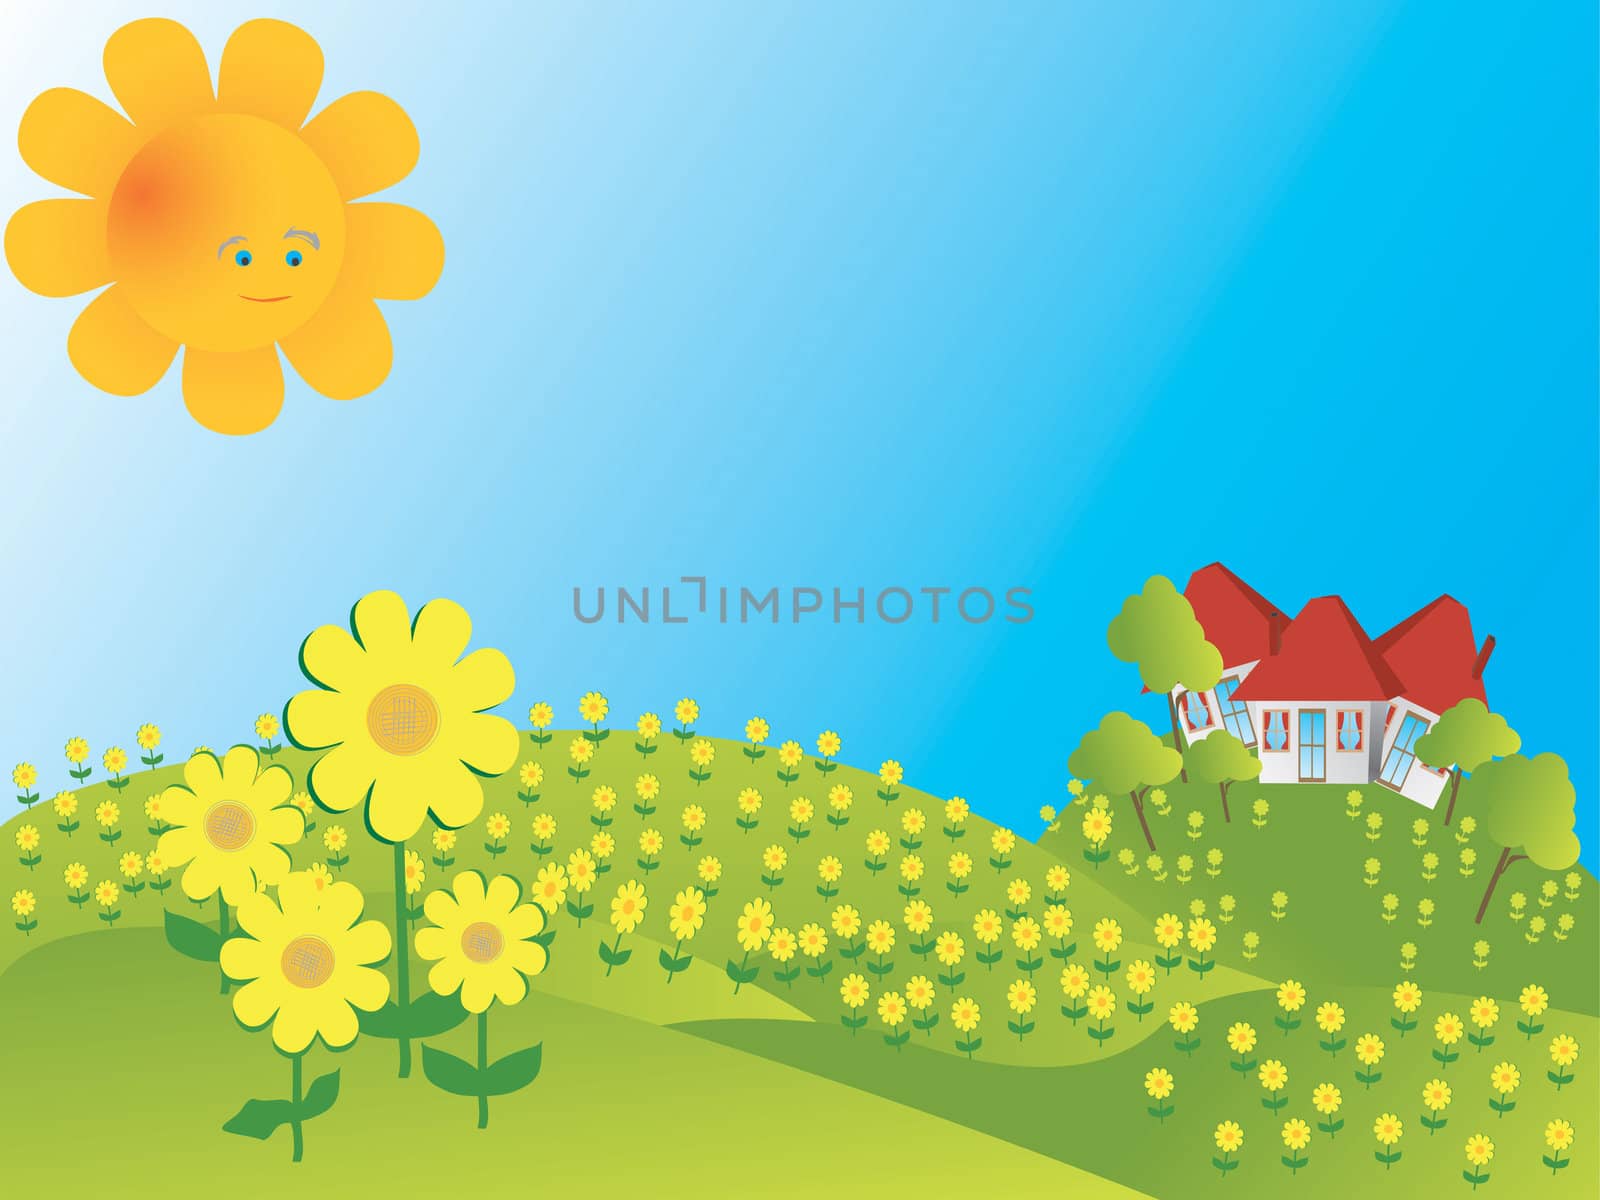 Background illustration with sunflowers